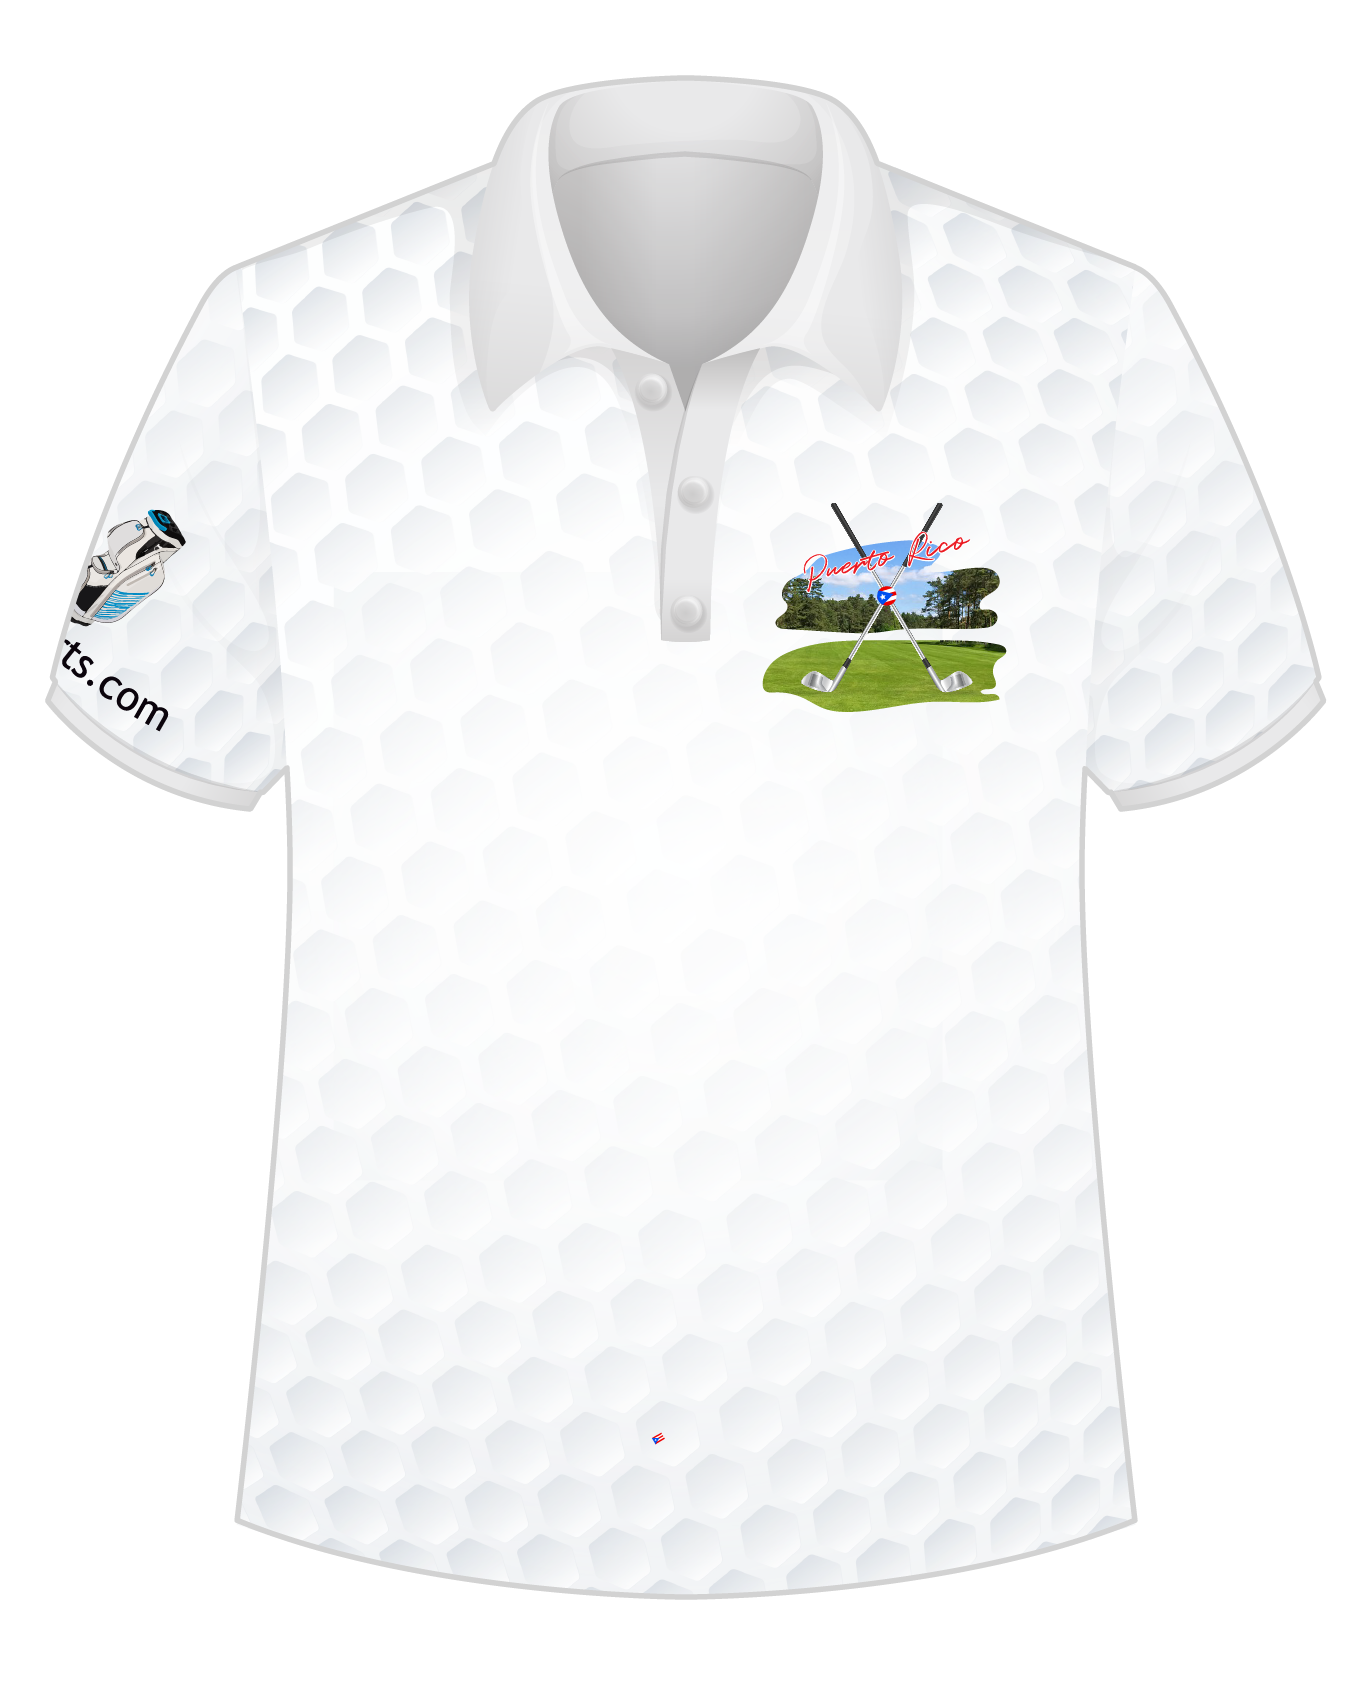 Puerto Rico Golf Polo Shirt - 100% Dry Fit